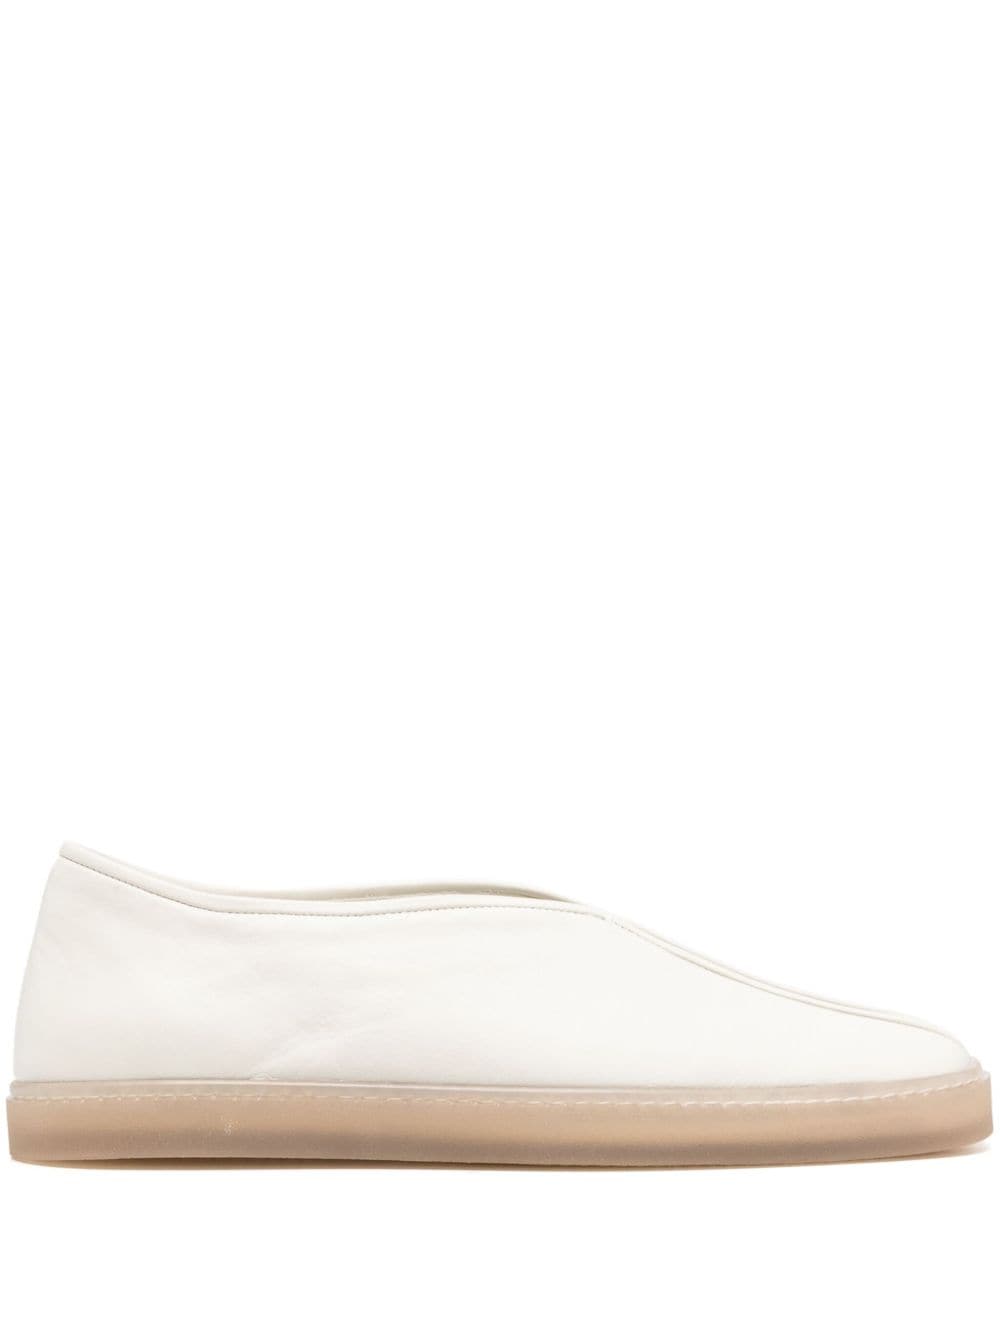 LEMAIRE Piped slip-on sneakers - Neutrals von LEMAIRE